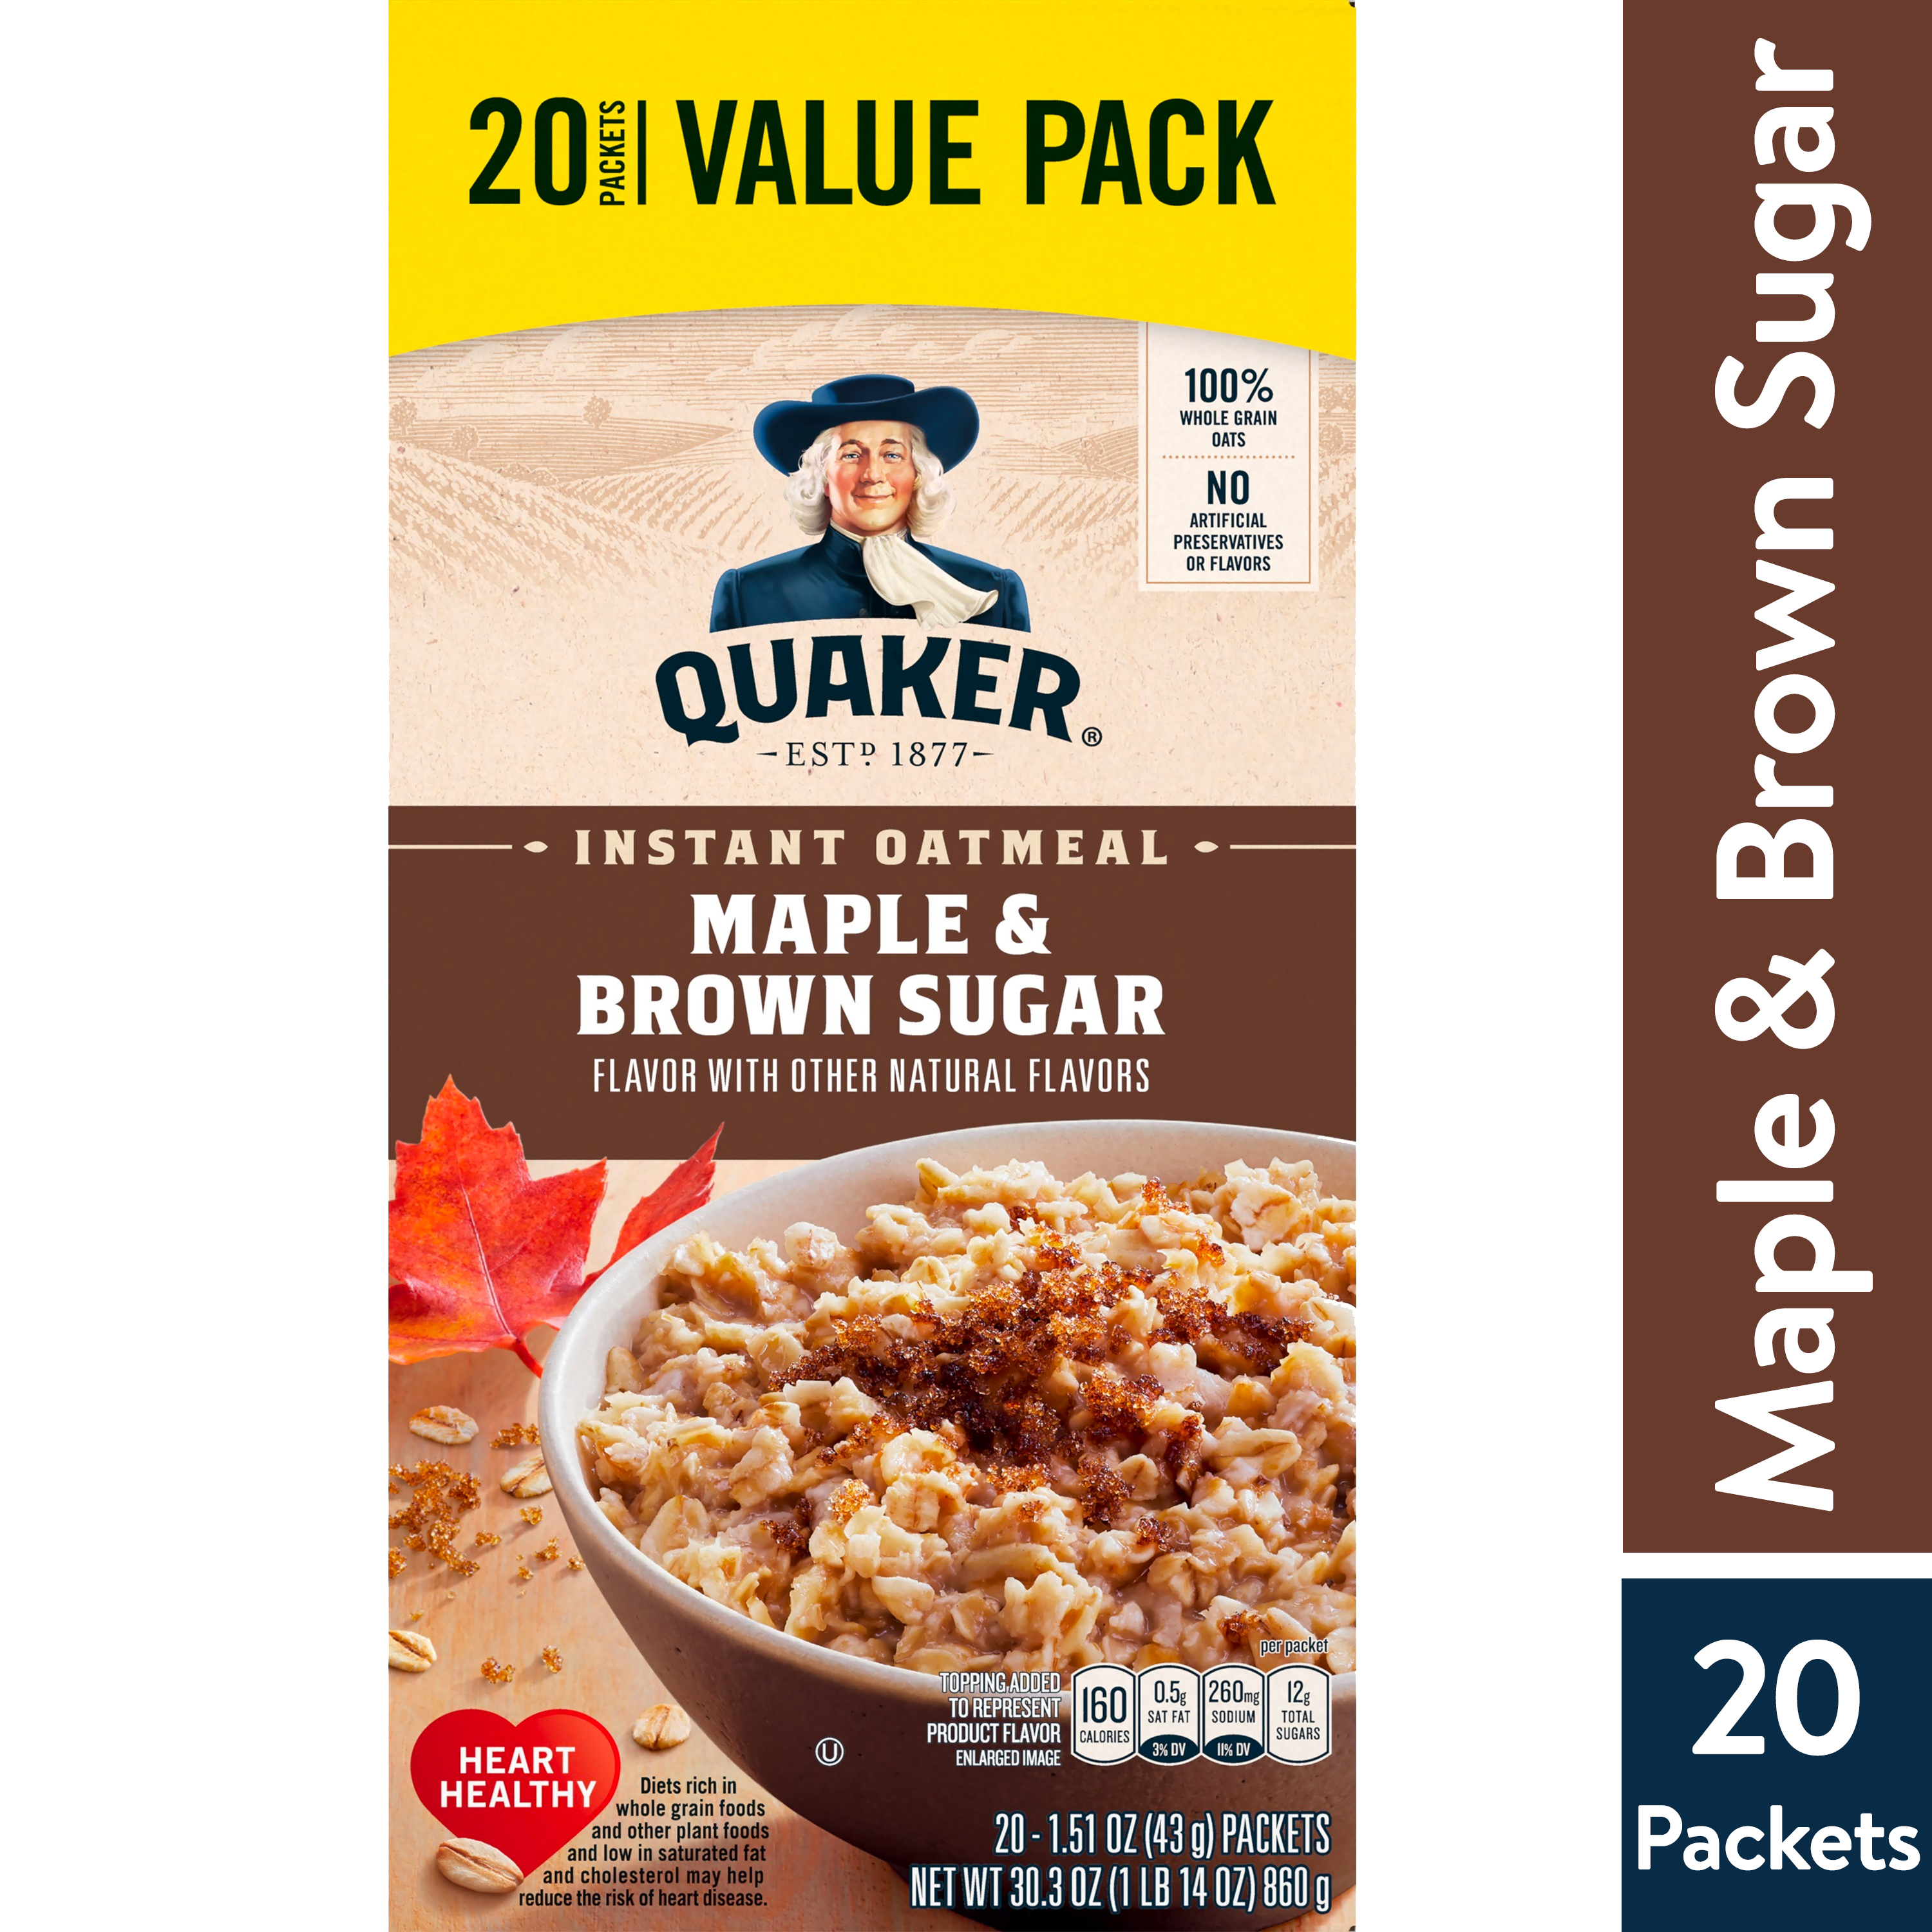 Quaker, Instant Oatmeal, Maple & Brown Sugar, Quick Cook Oatmeal, 1.51 oz, 20 Packets - image 1 of 8